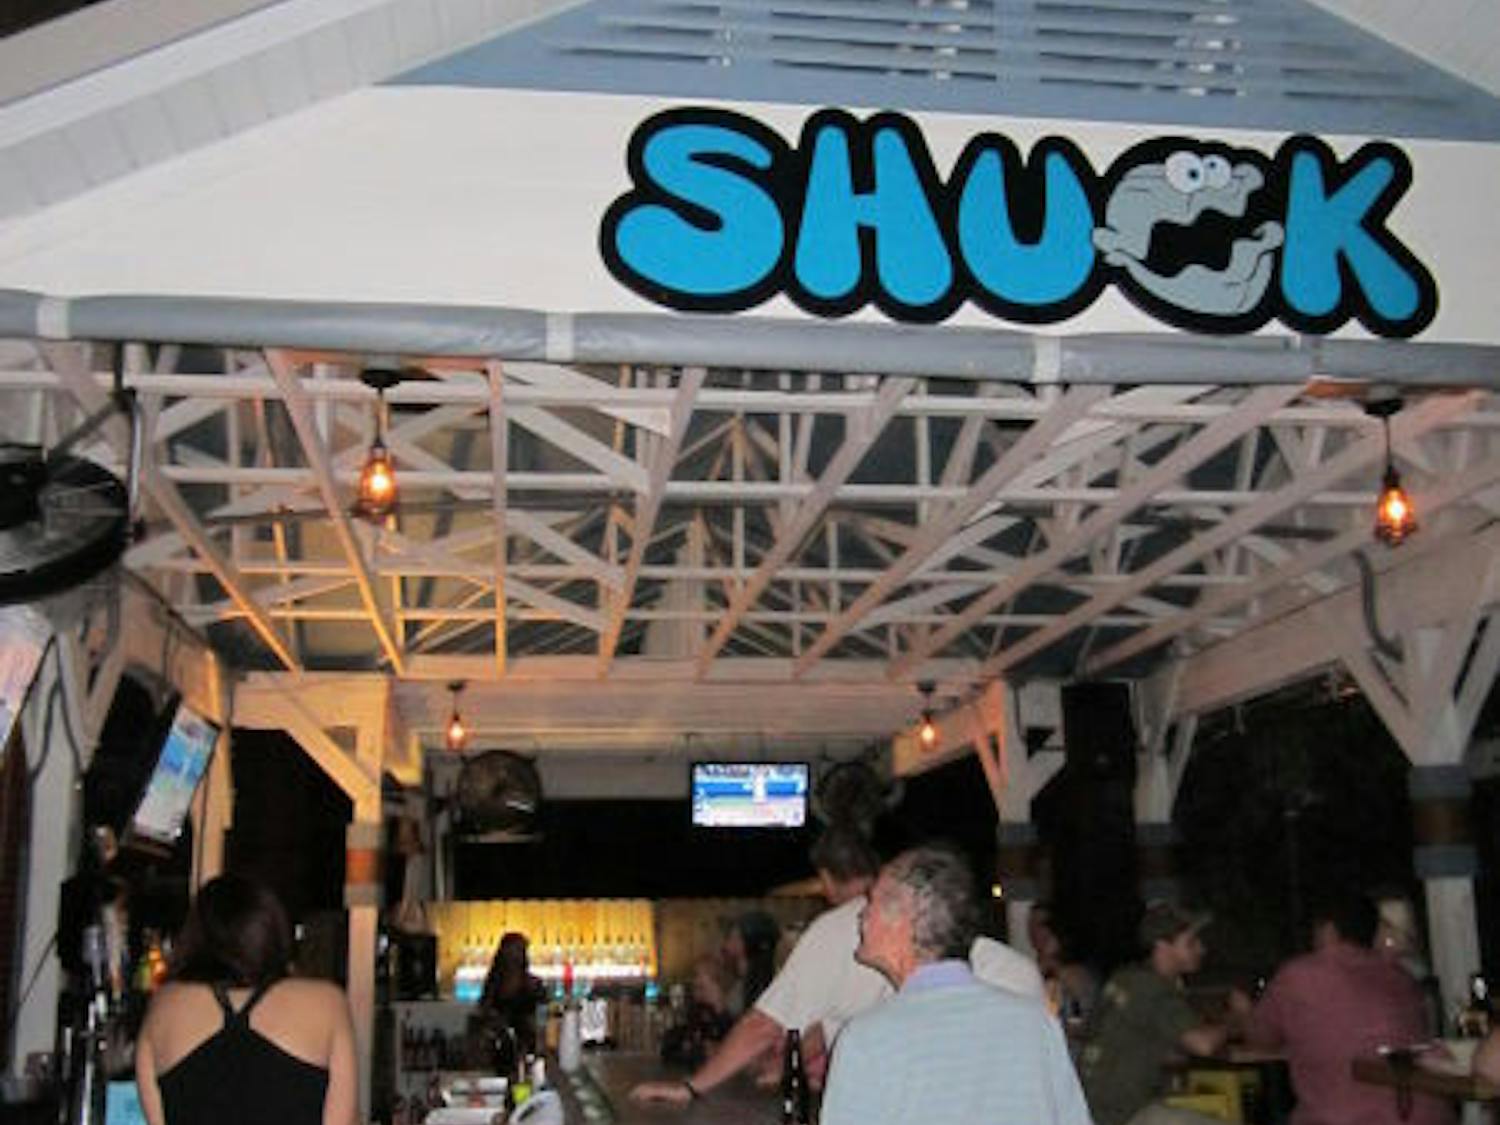 Customers at Shuck Raw Bar and Restaurant in Midtown sit outside watching TV at the bar and chatting among friends. They can enjoy seafood and drinks there and a free shot at sunset.